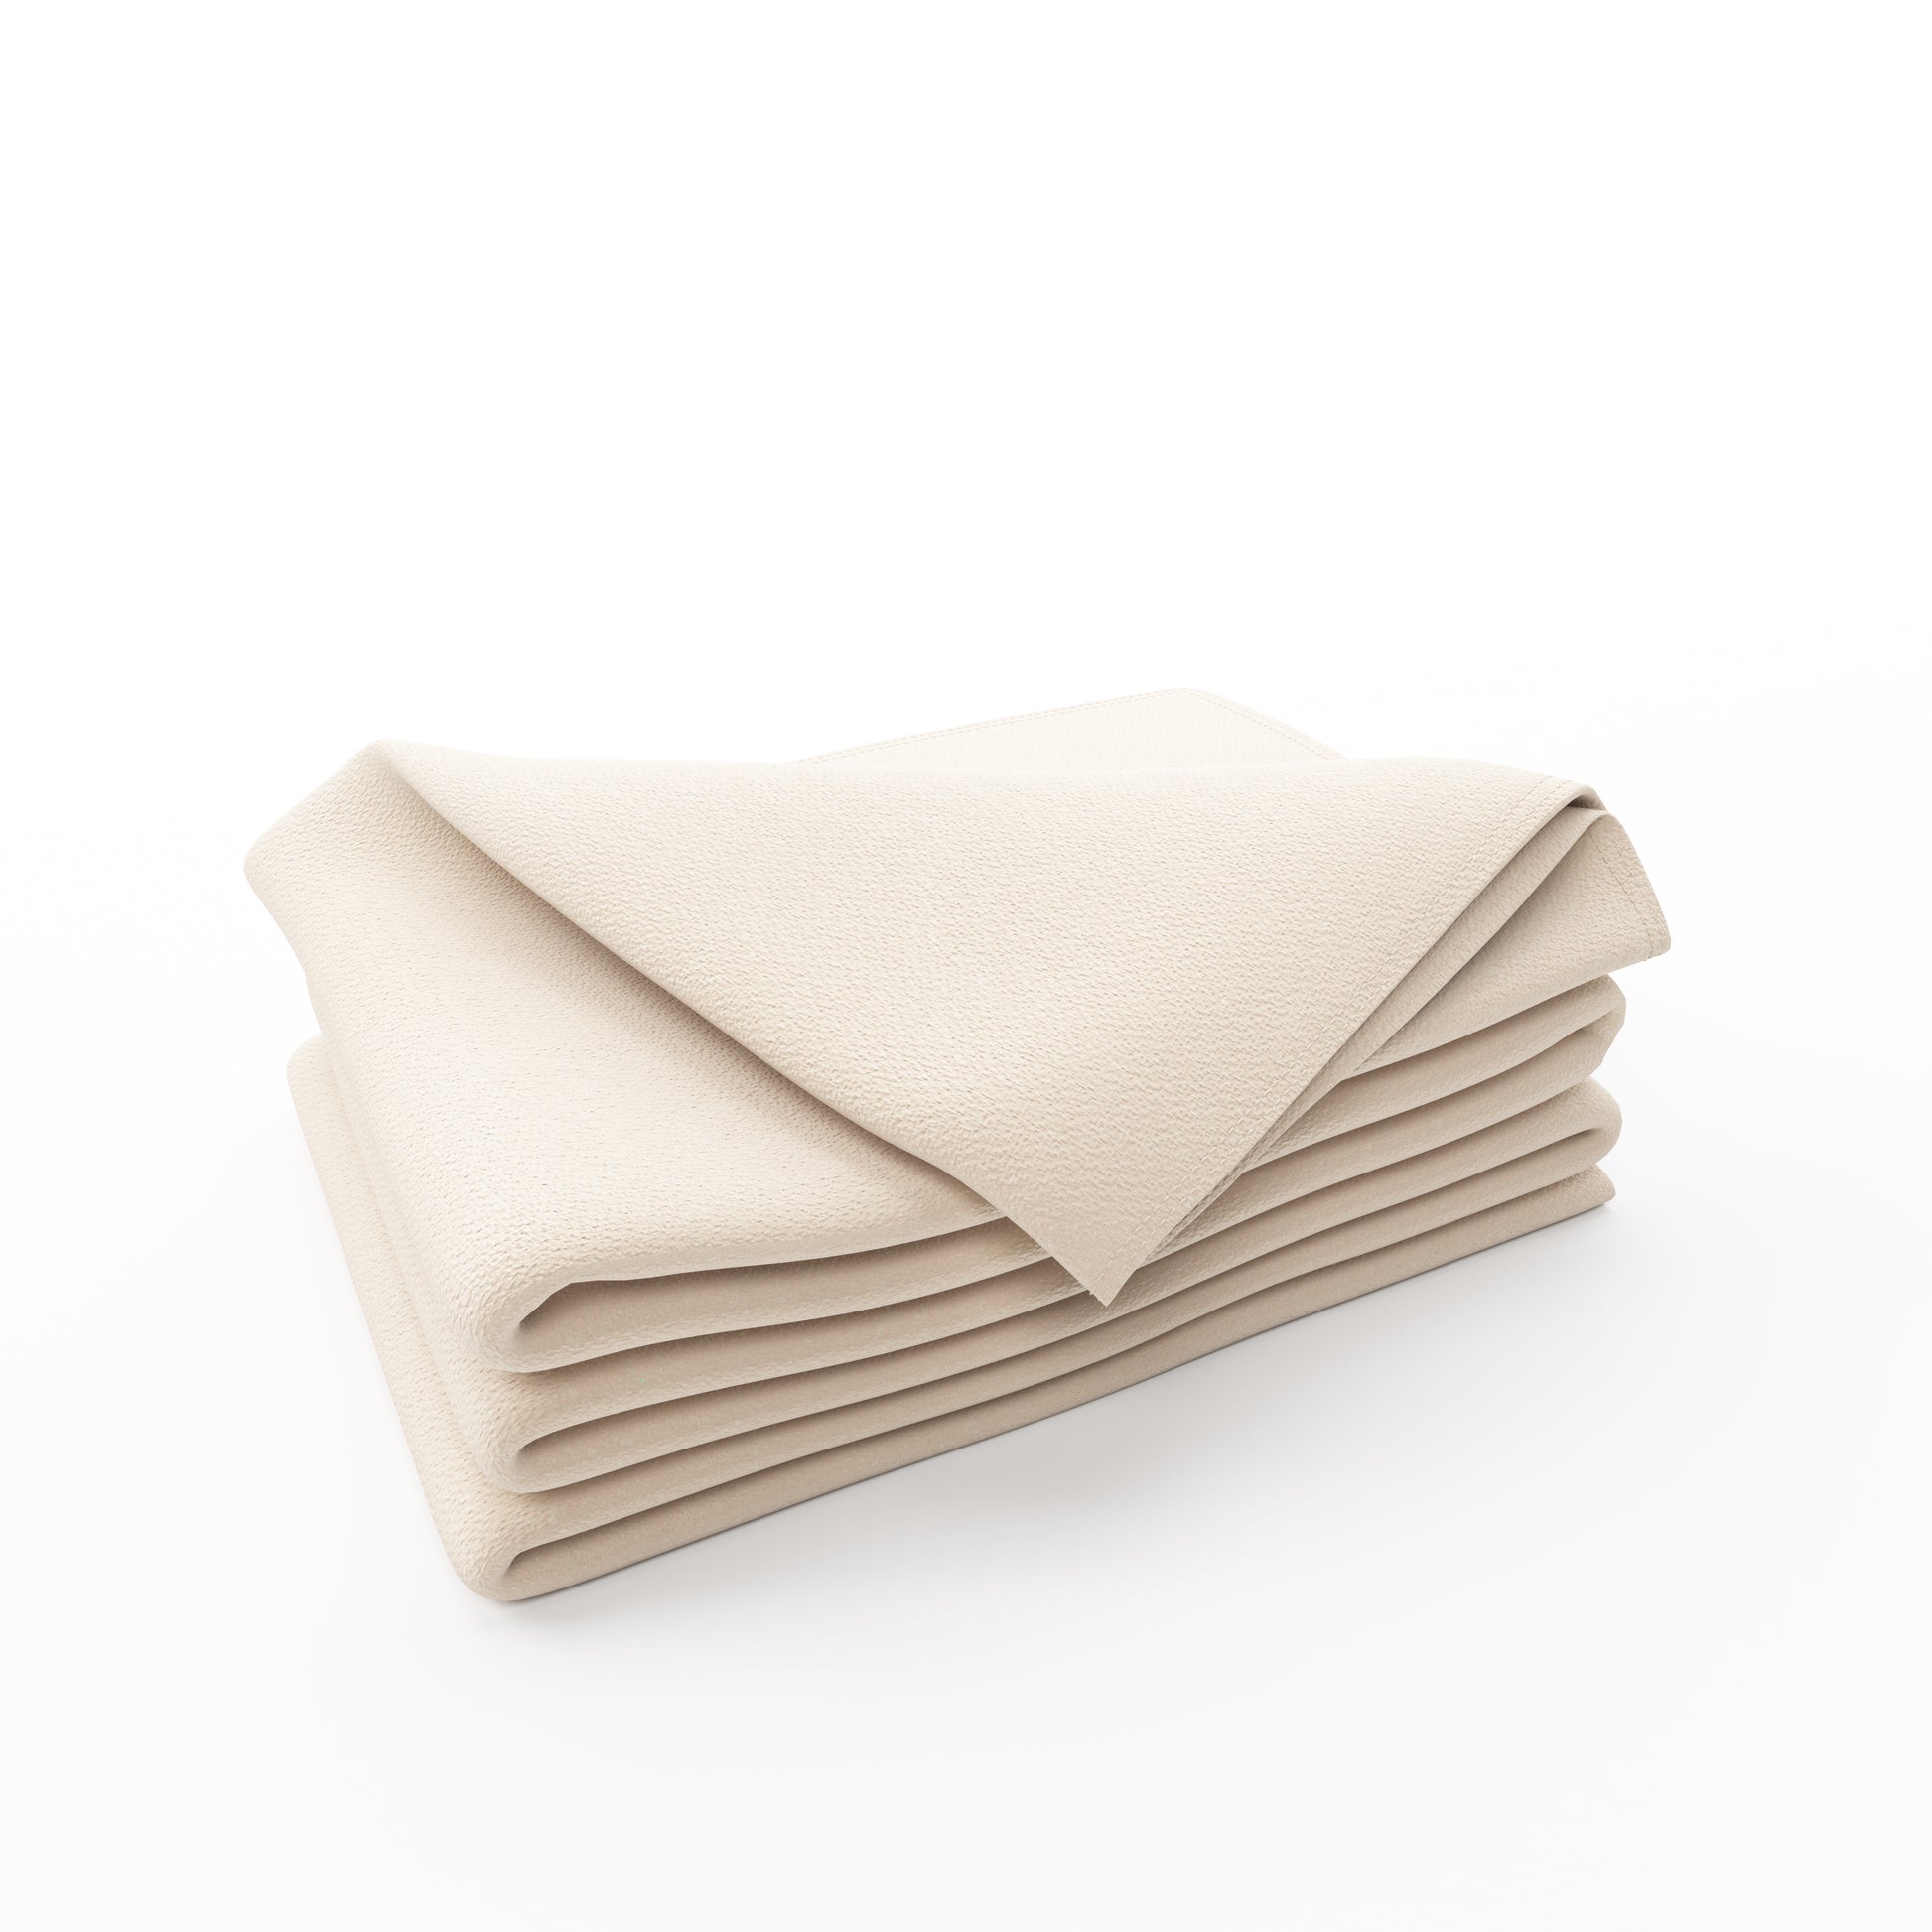 Organic cotton knitted blanket neatly folded on a white background